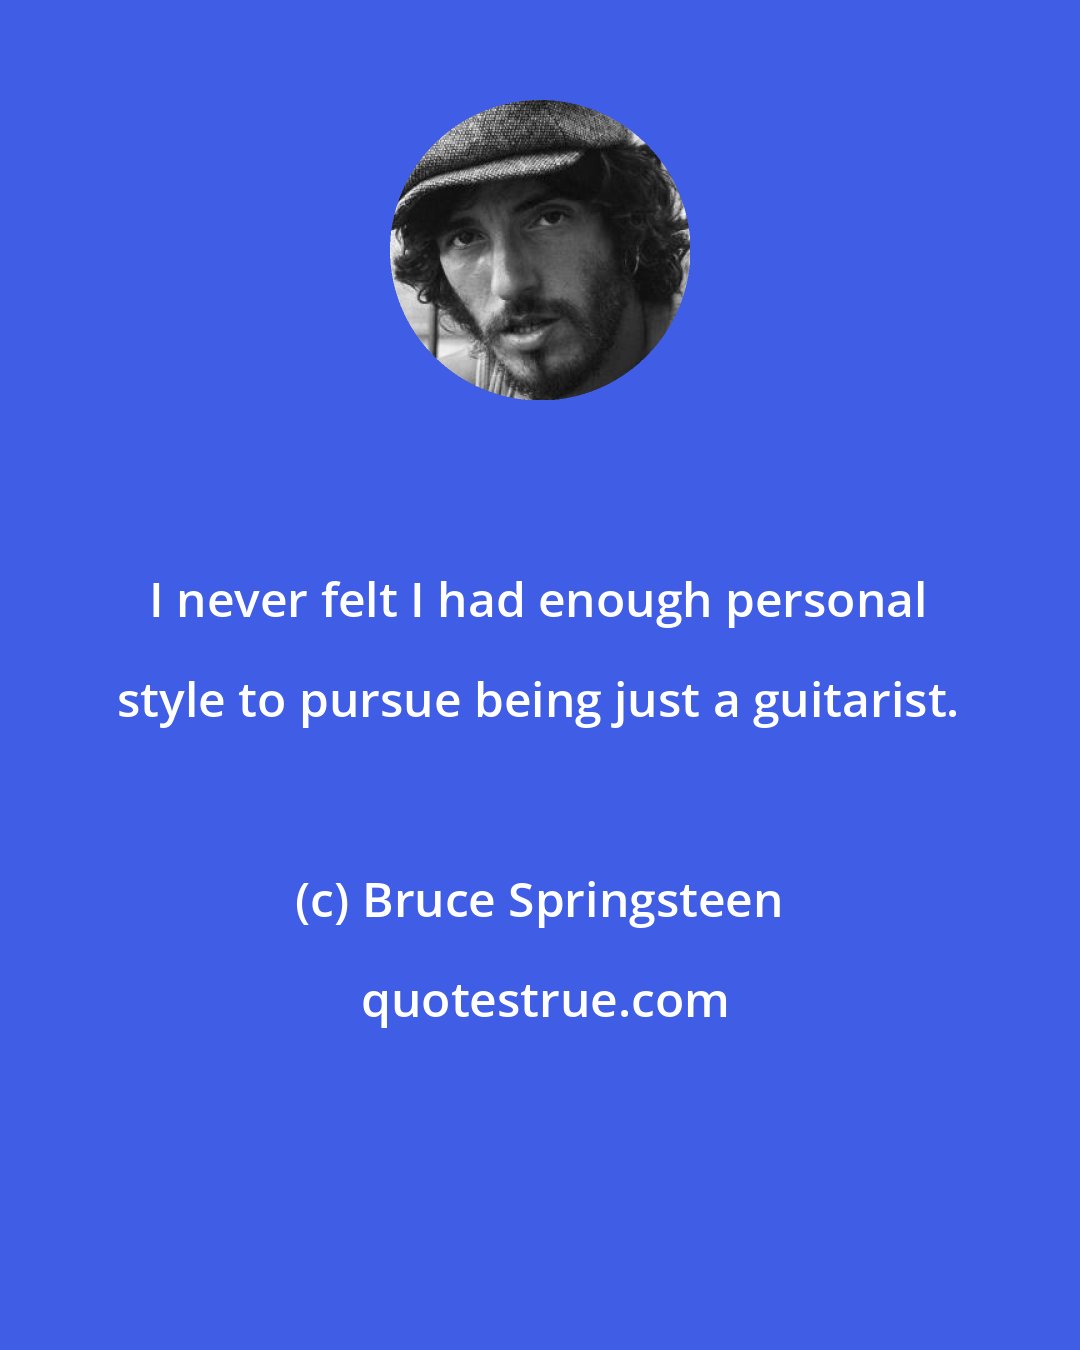 Bruce Springsteen: I never felt I had enough personal style to pursue being just a guitarist.